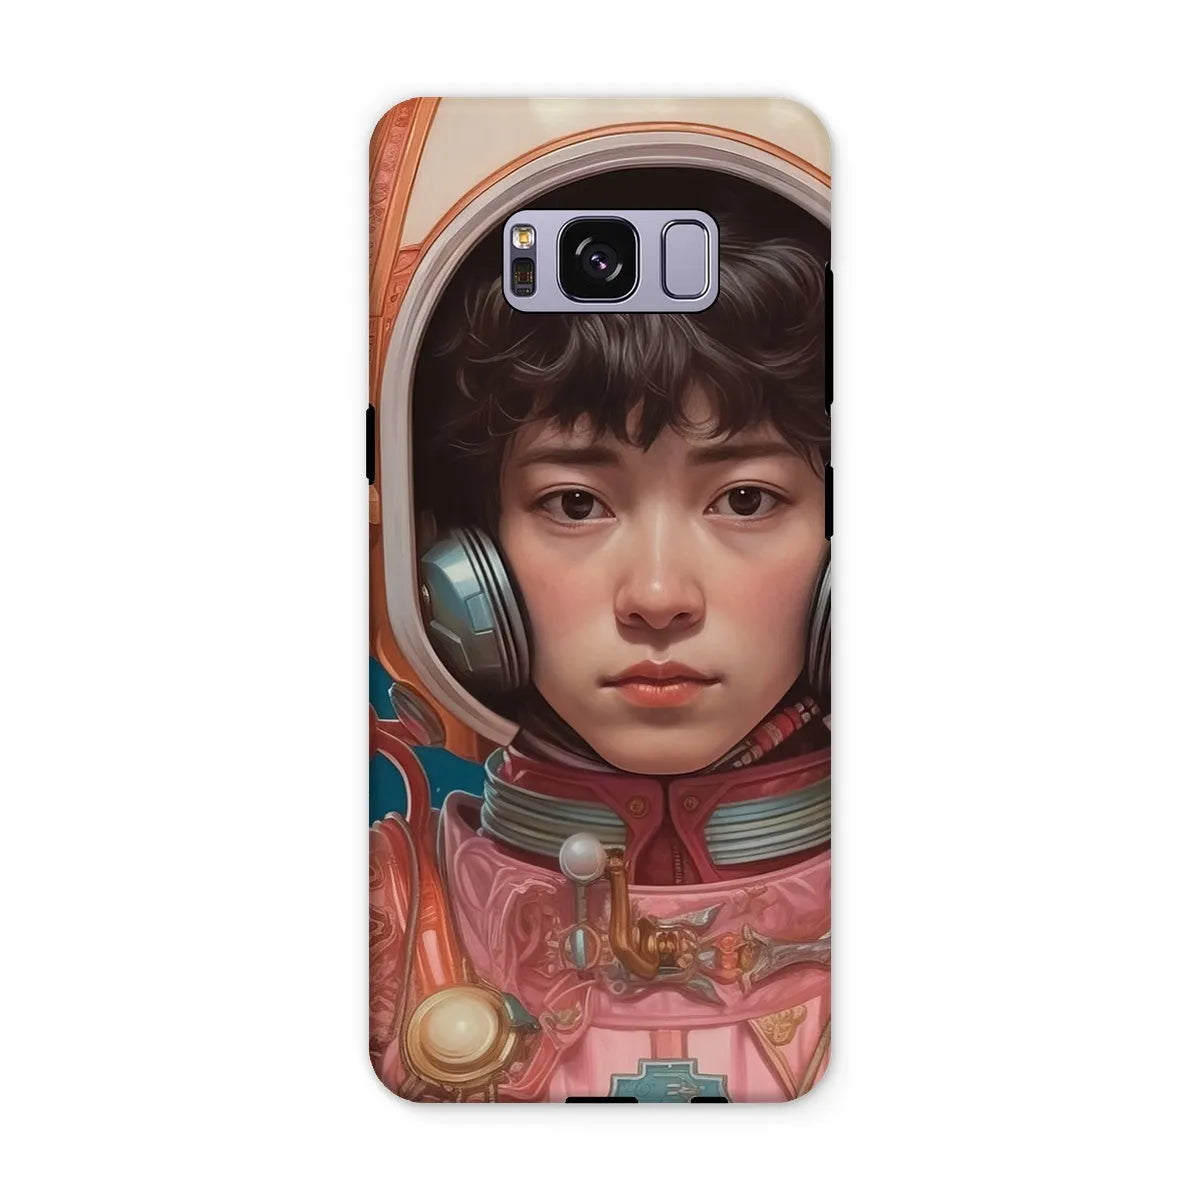 Kaito The Gay Astronaut - Lgbtq Art Phone Case - Samsung Galaxy S8 Plus / Matte - Mobile Phone Cases - Aesthetic Art